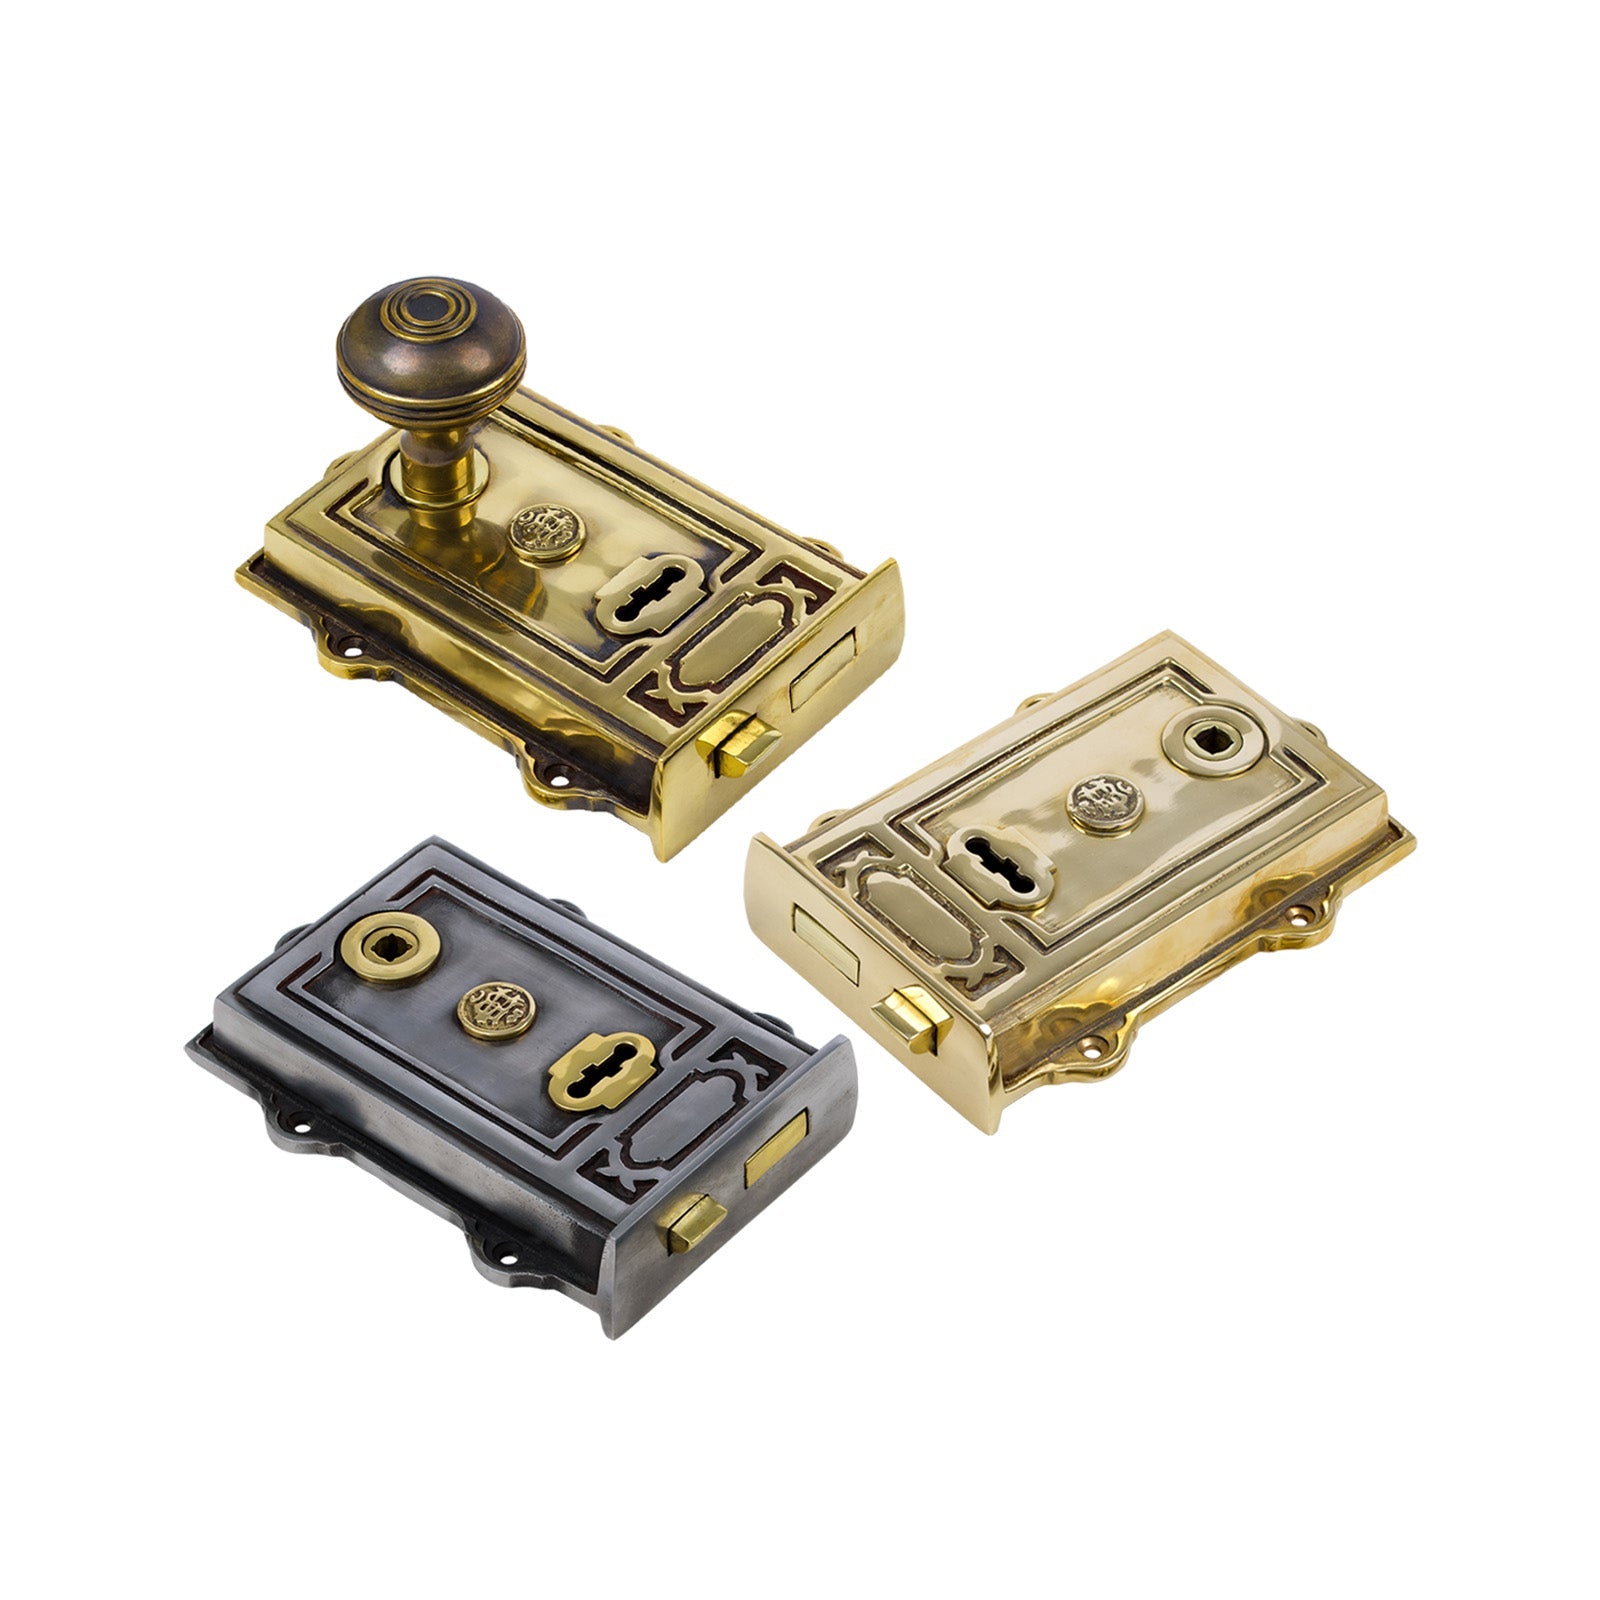 Ornate Davenport reversible rim locks in 3 different finishes, available with matching door knob sets.